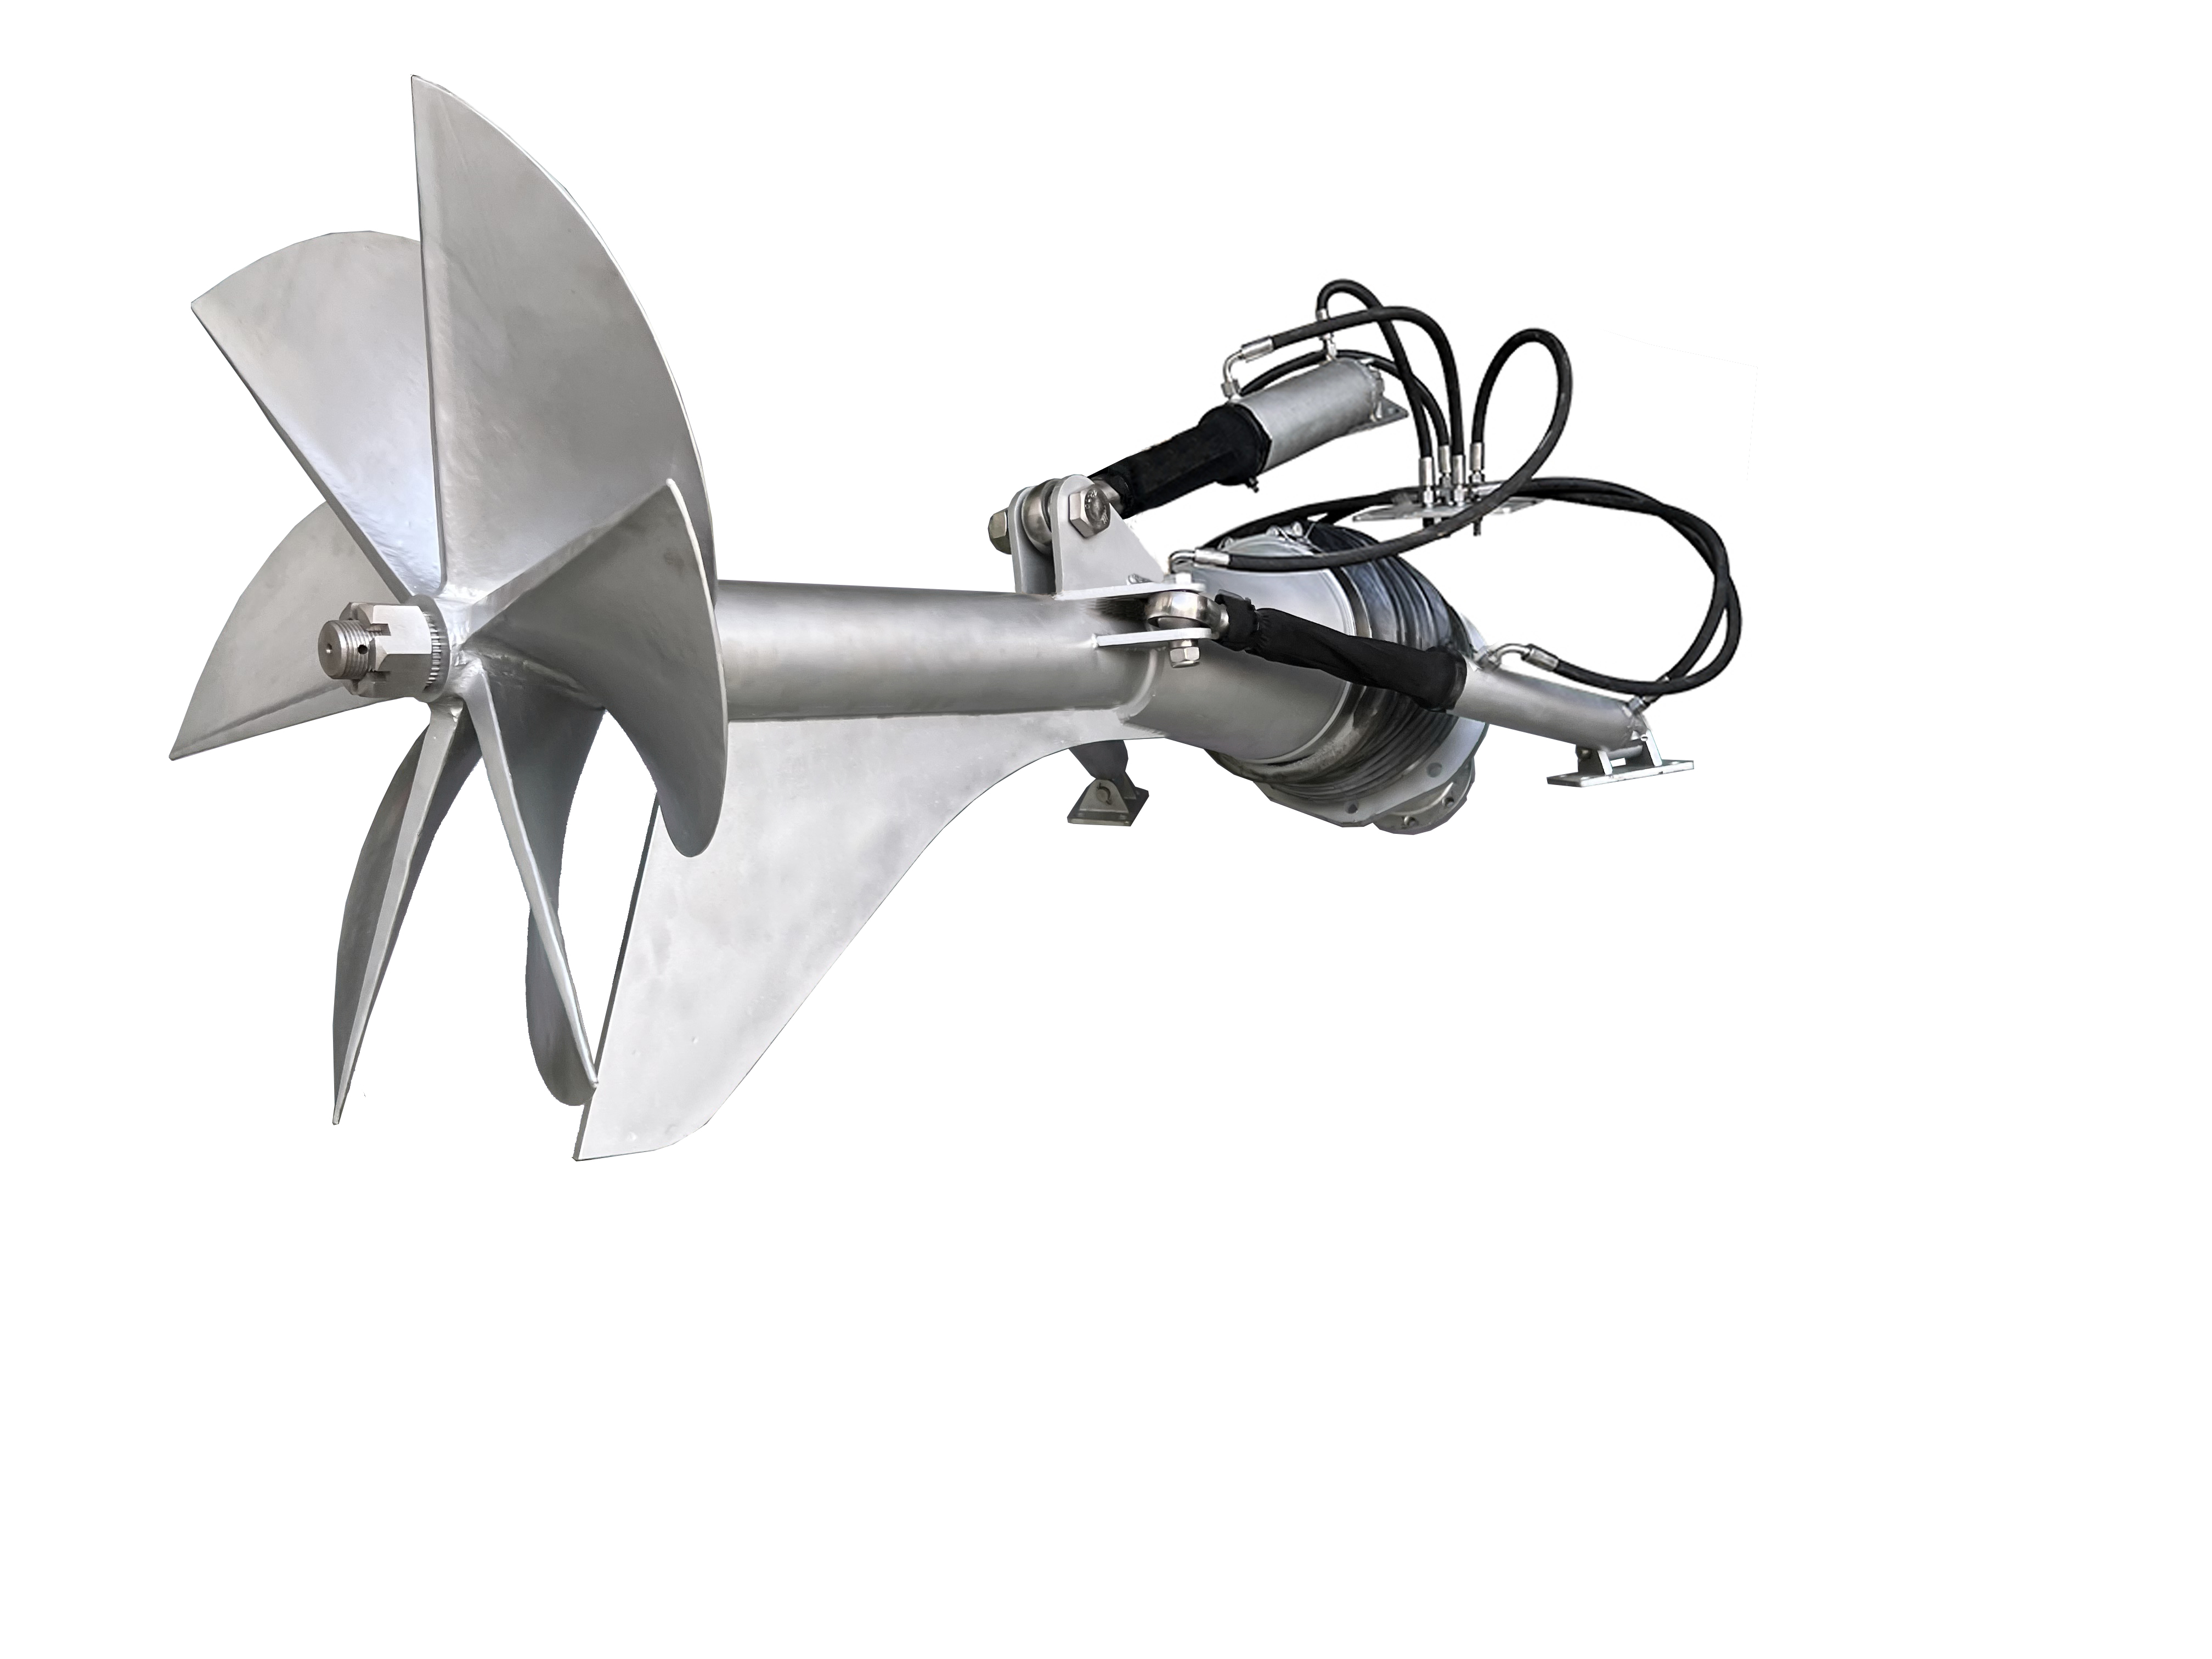 BH660 400Horsepower Marine Gearbox Boat Propeller Low Maintenance Surface Drive 